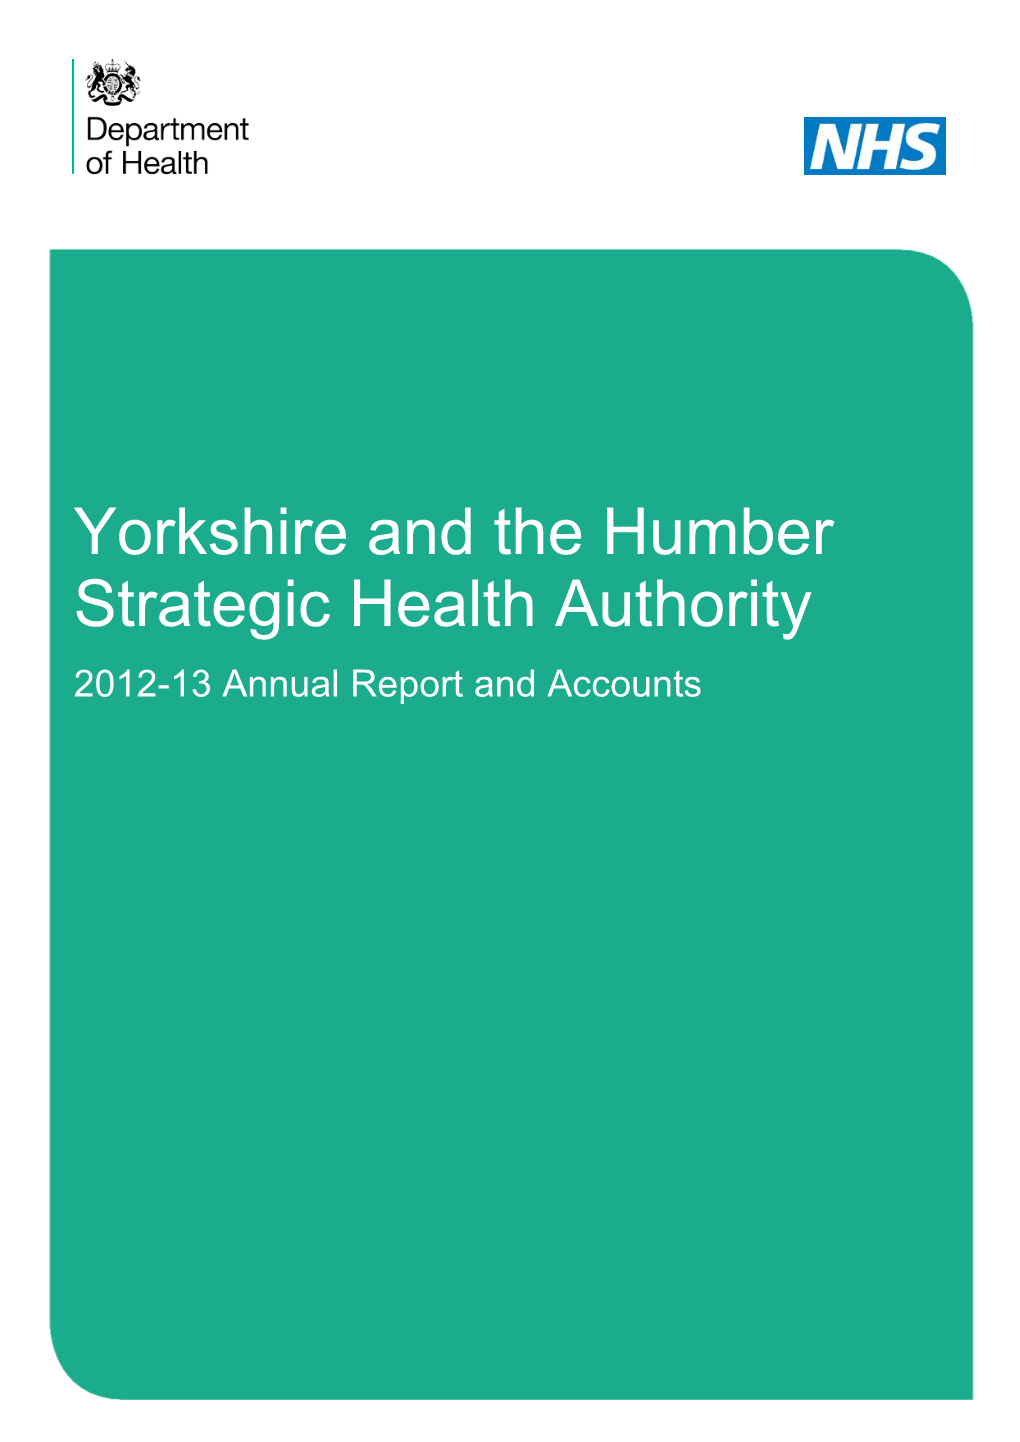 Yorkshire and the Humber Strategic Health Authority 2012-13 Annual Report and Accounts